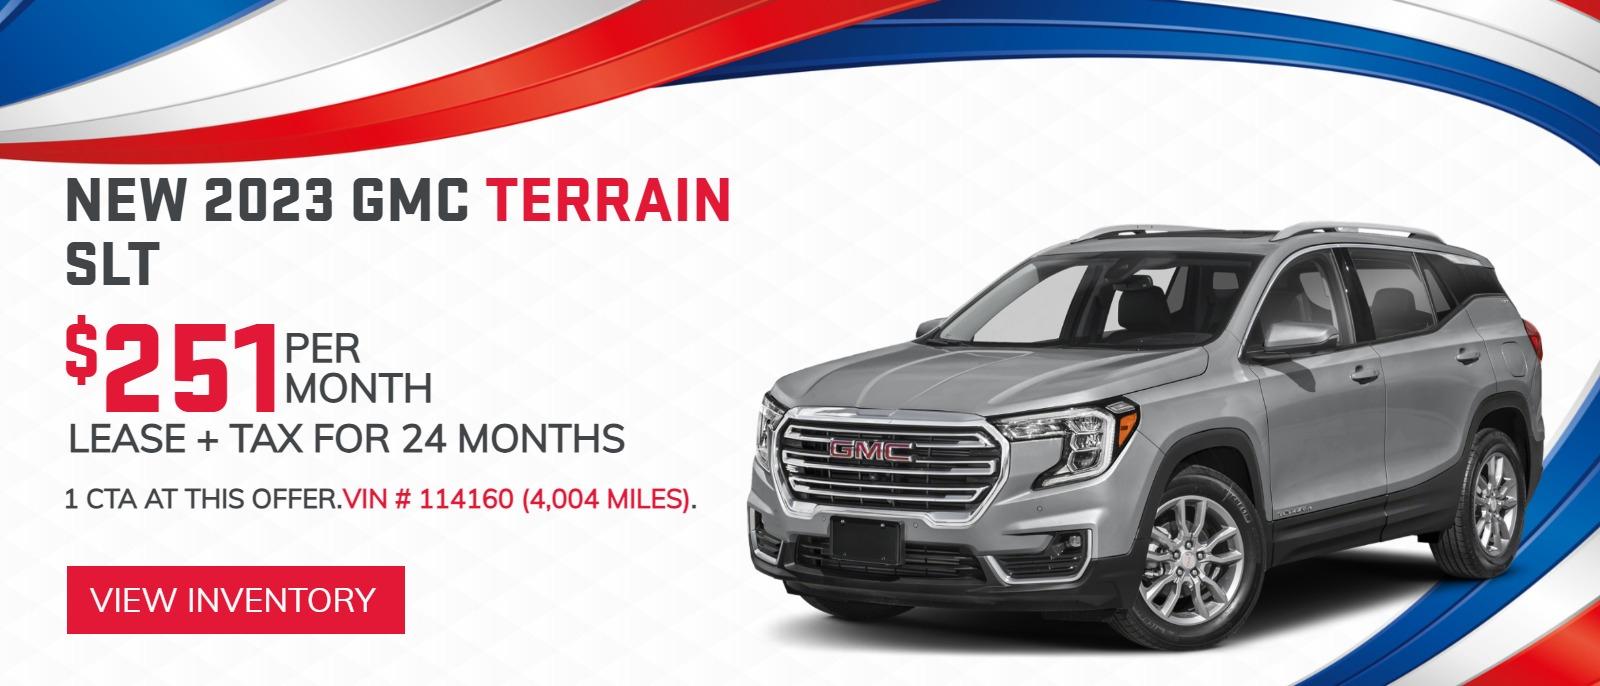 New 2023 GMC Terrain SLT
$251/mo.* Lease + Tax for 24 Months
1 CTA at this offer. VIN # 114160 (4,004 miles).